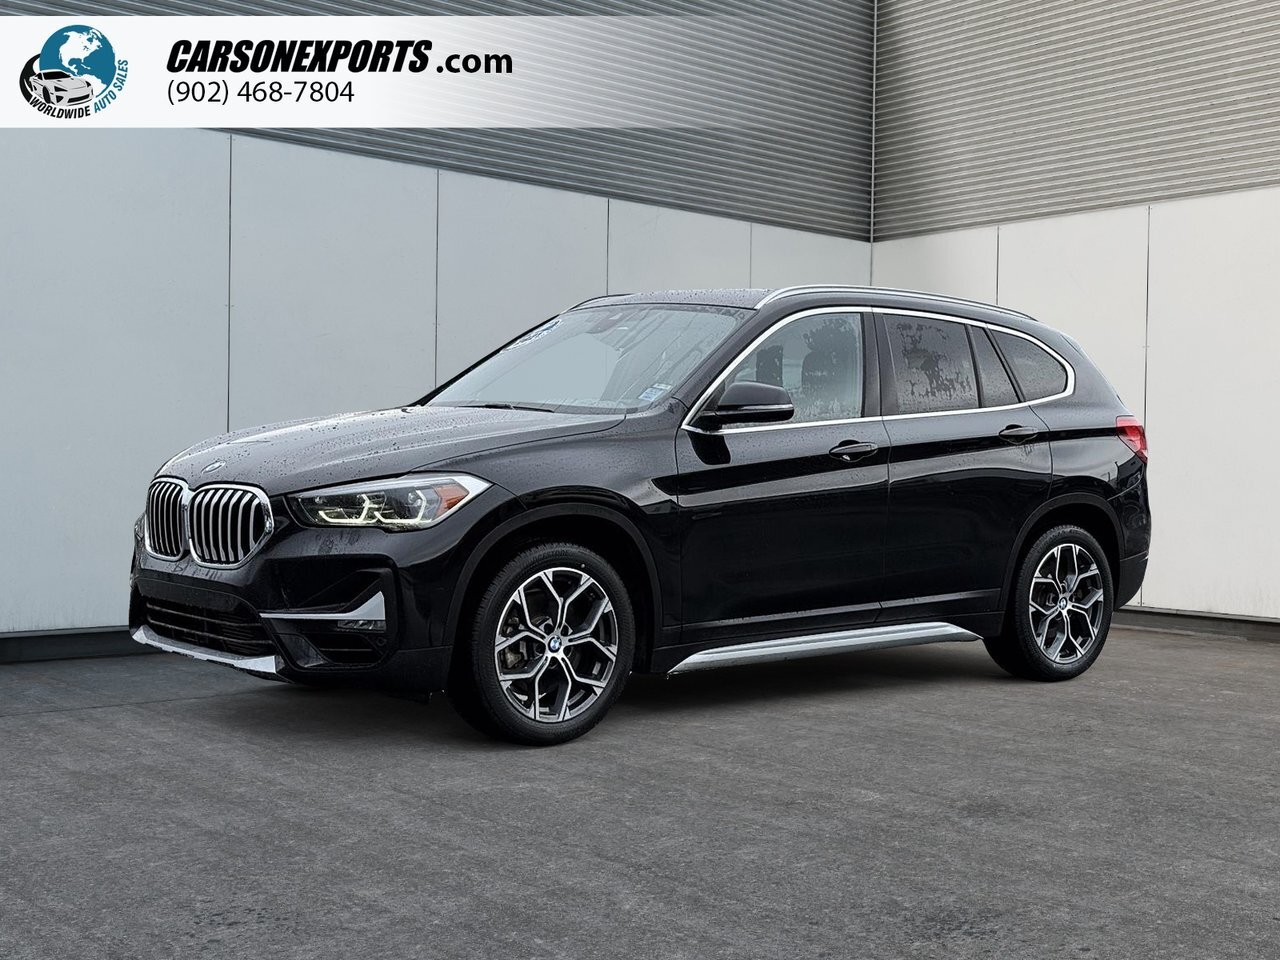 2021 BMW X1 XDrive28i The best place to buy a used car. Period